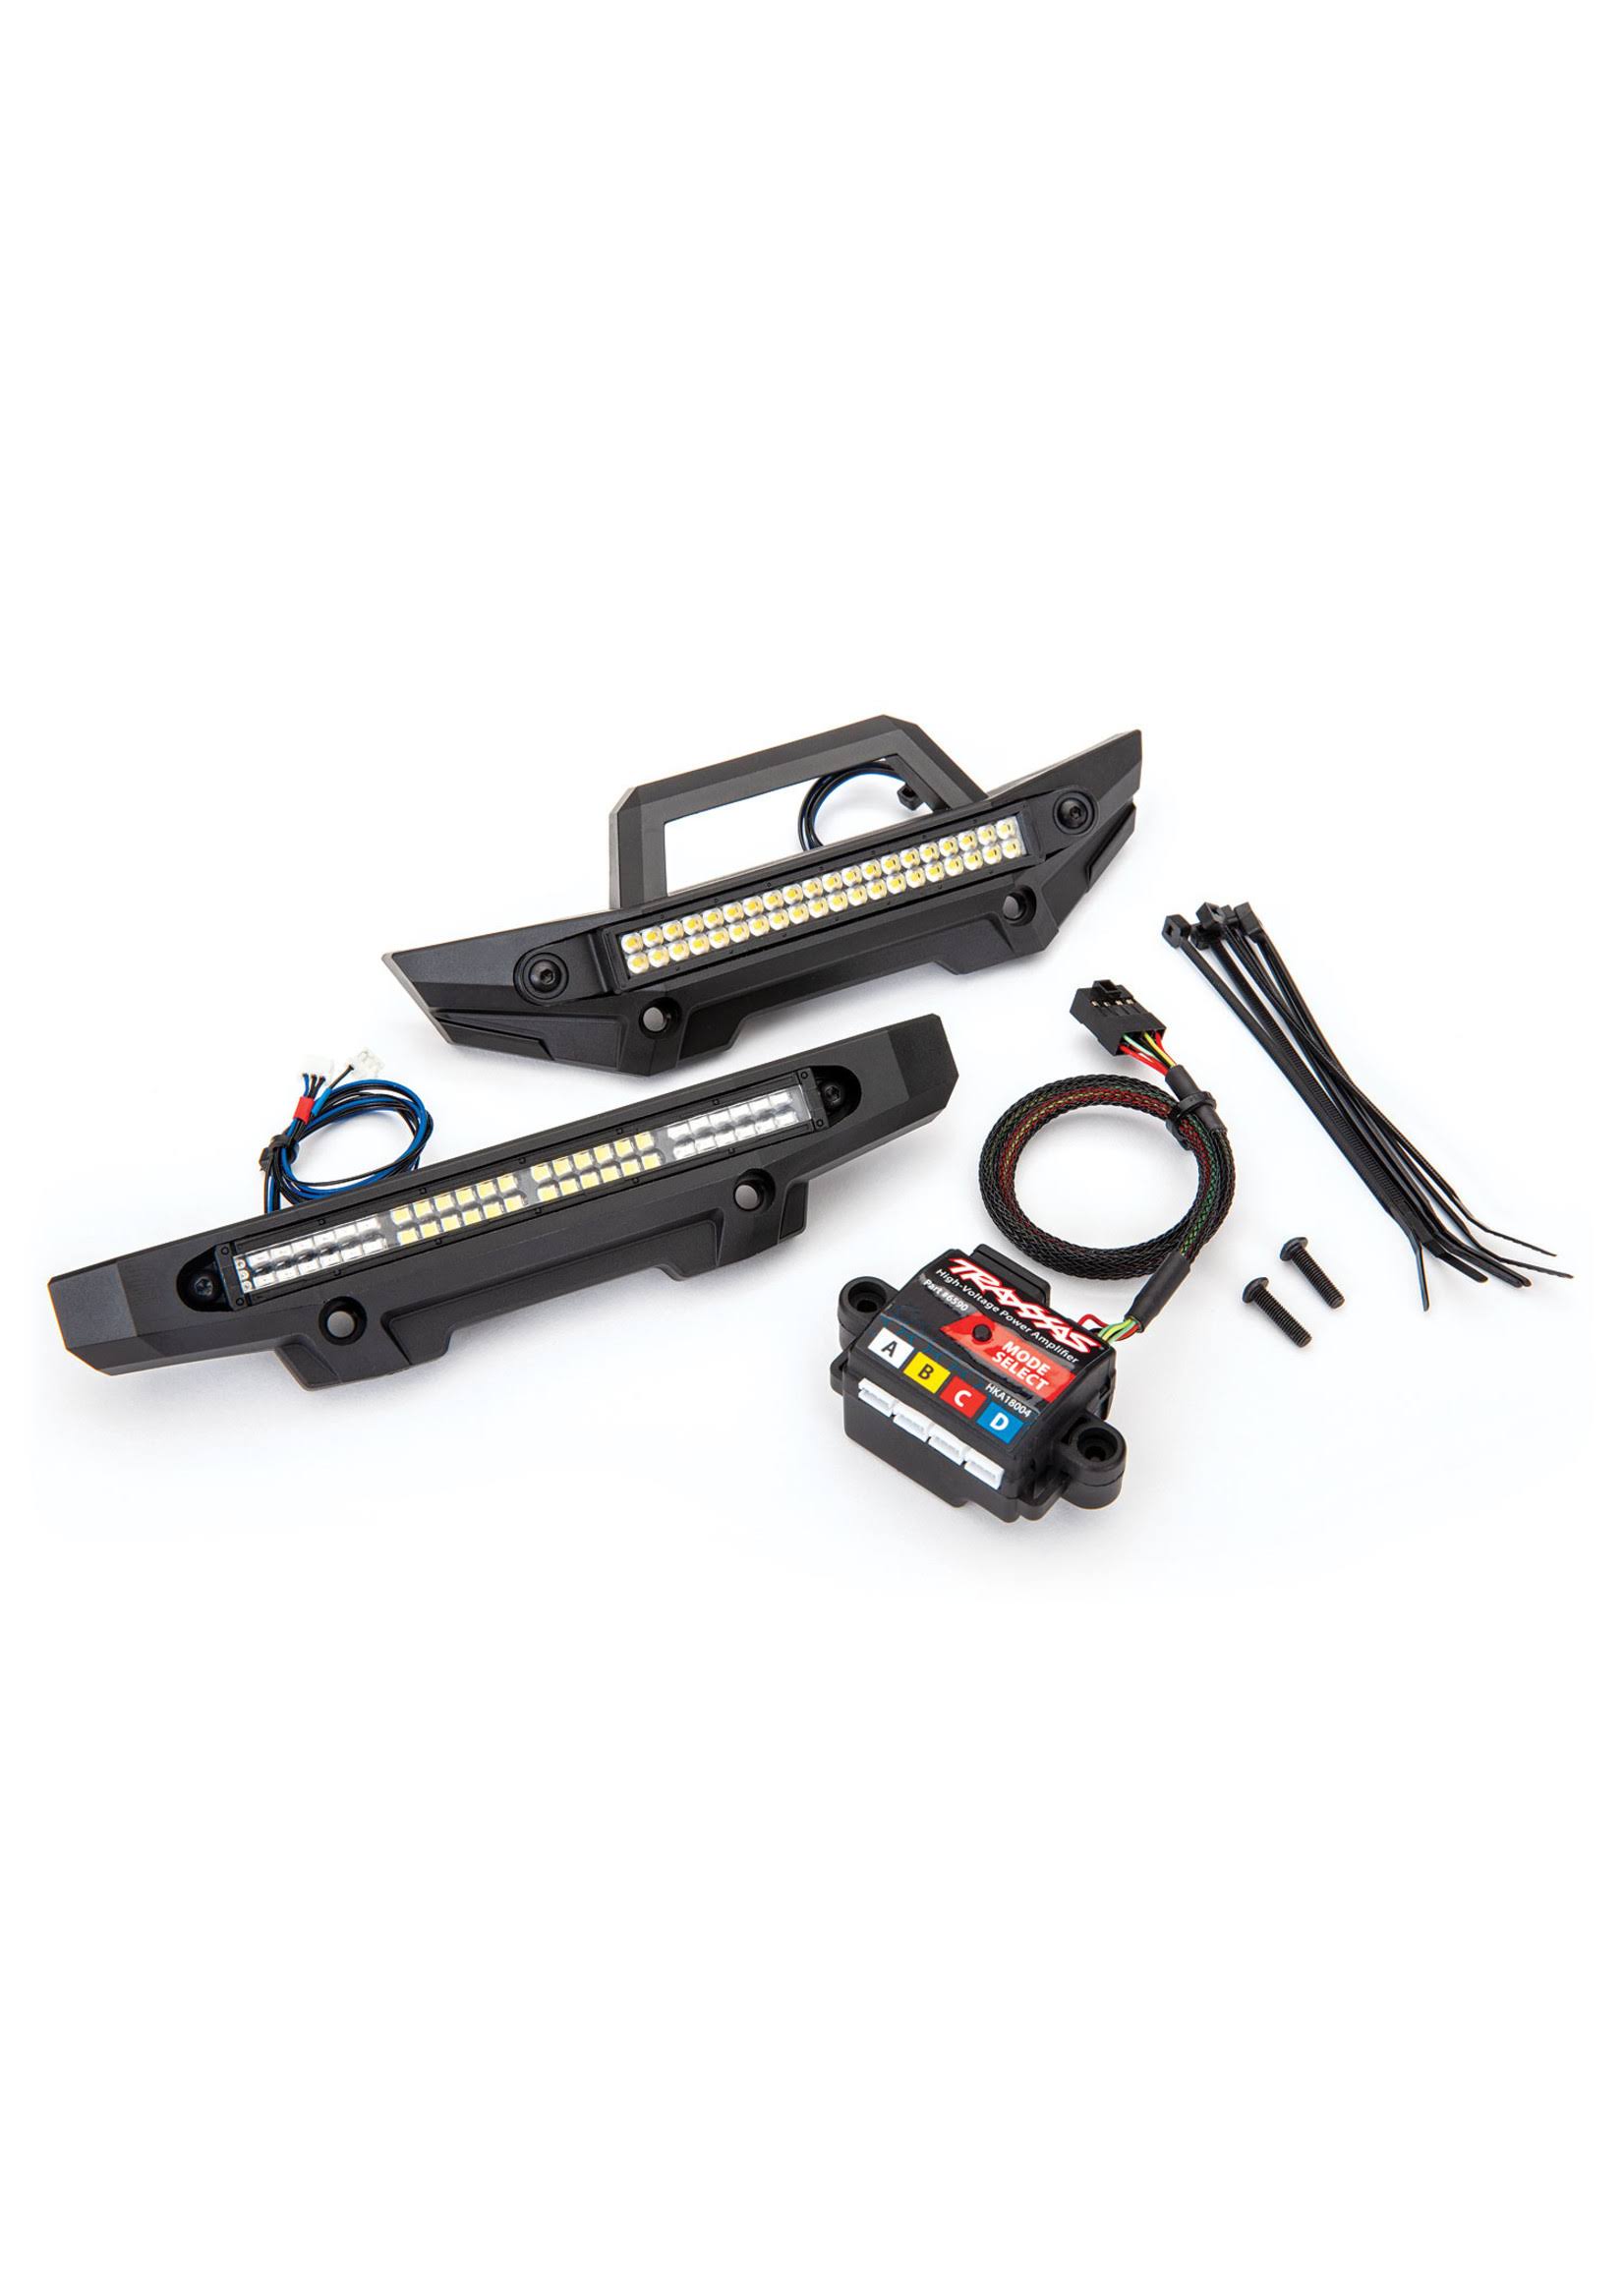 Traxxas Maxx Complete Led Light Kit - with High Power Amp